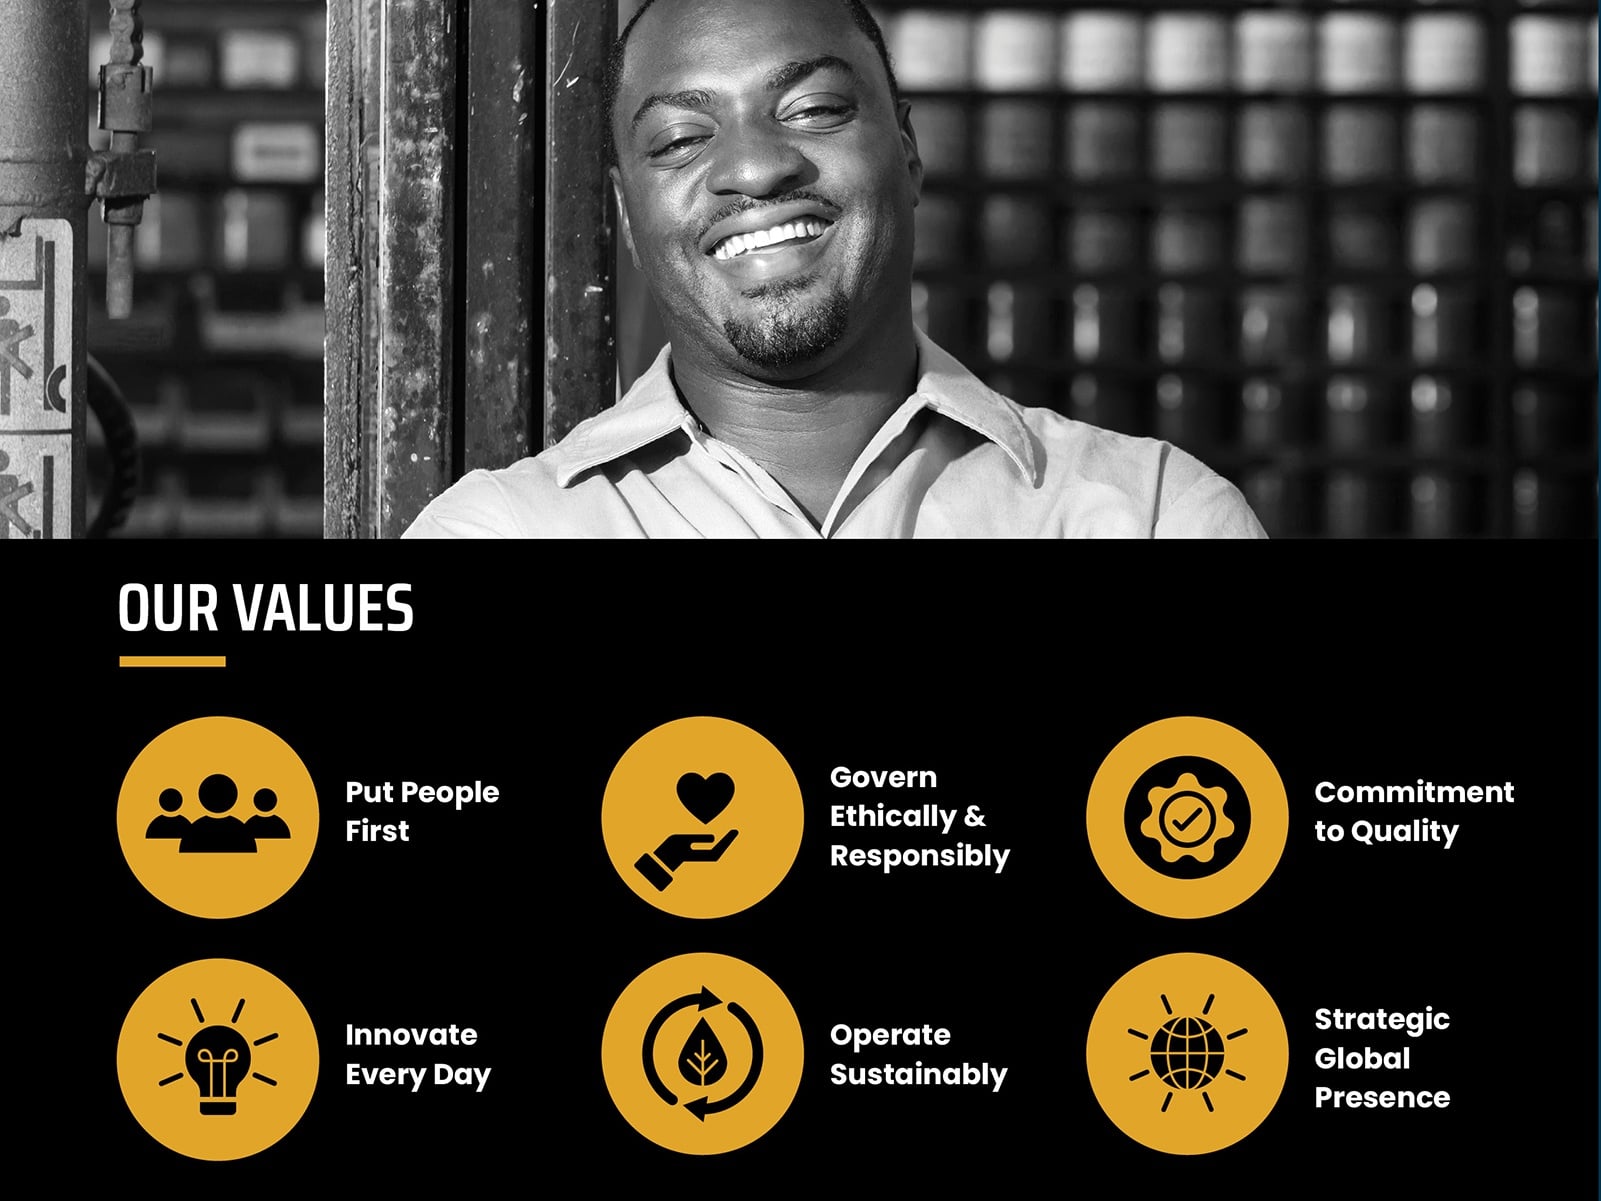 Insert from the annual report featuring a man smiling and the company values